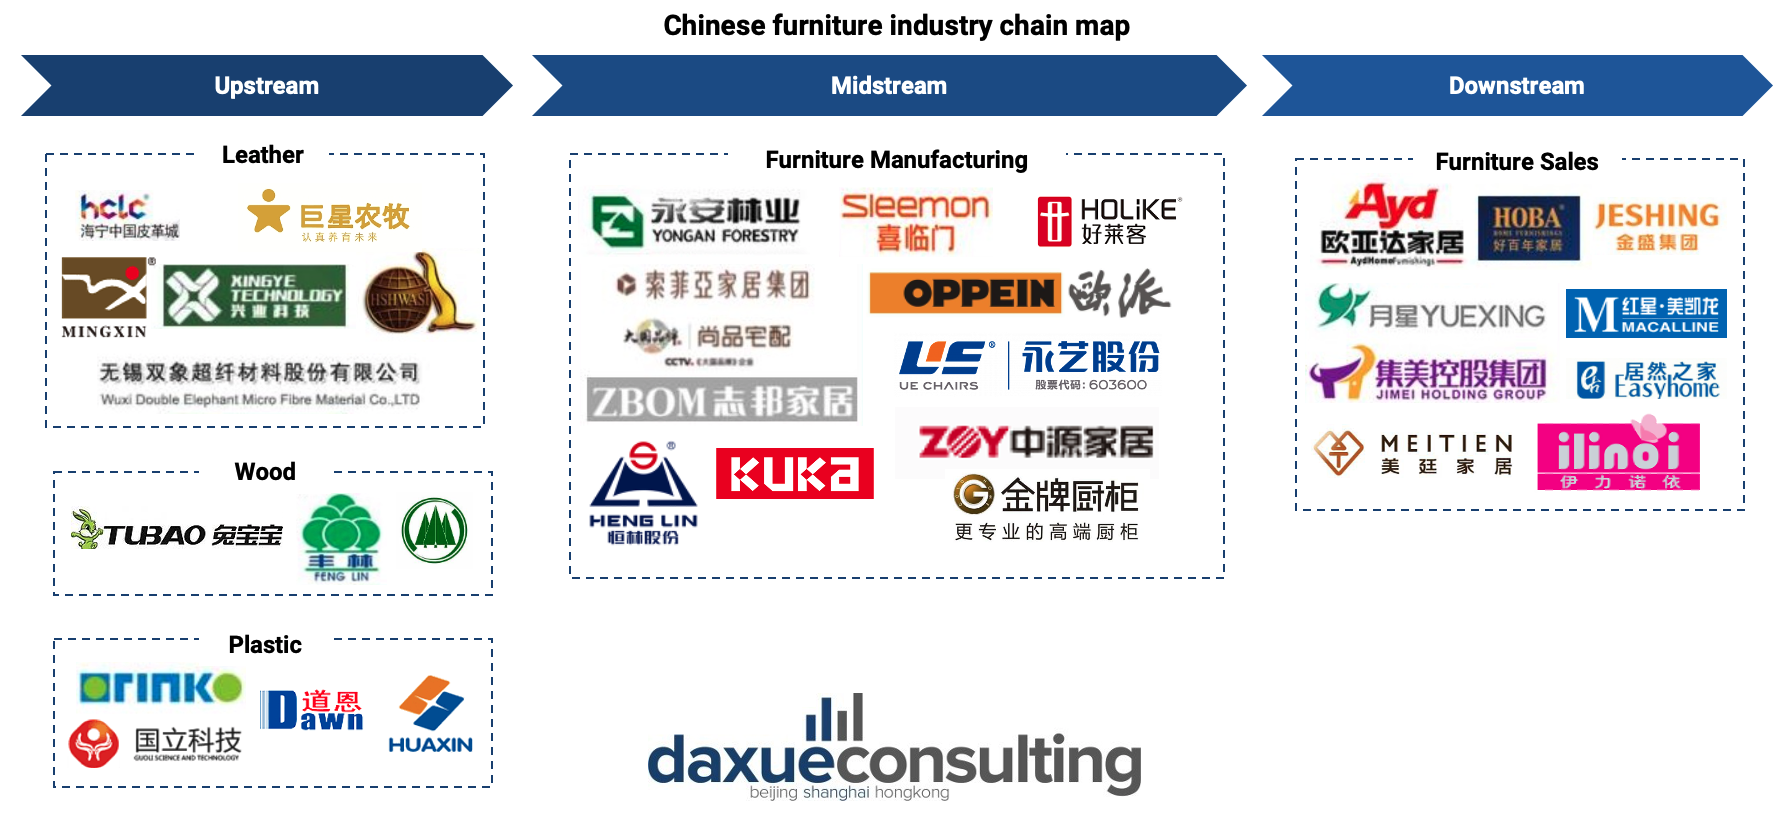  Chinese furniture industry chain map